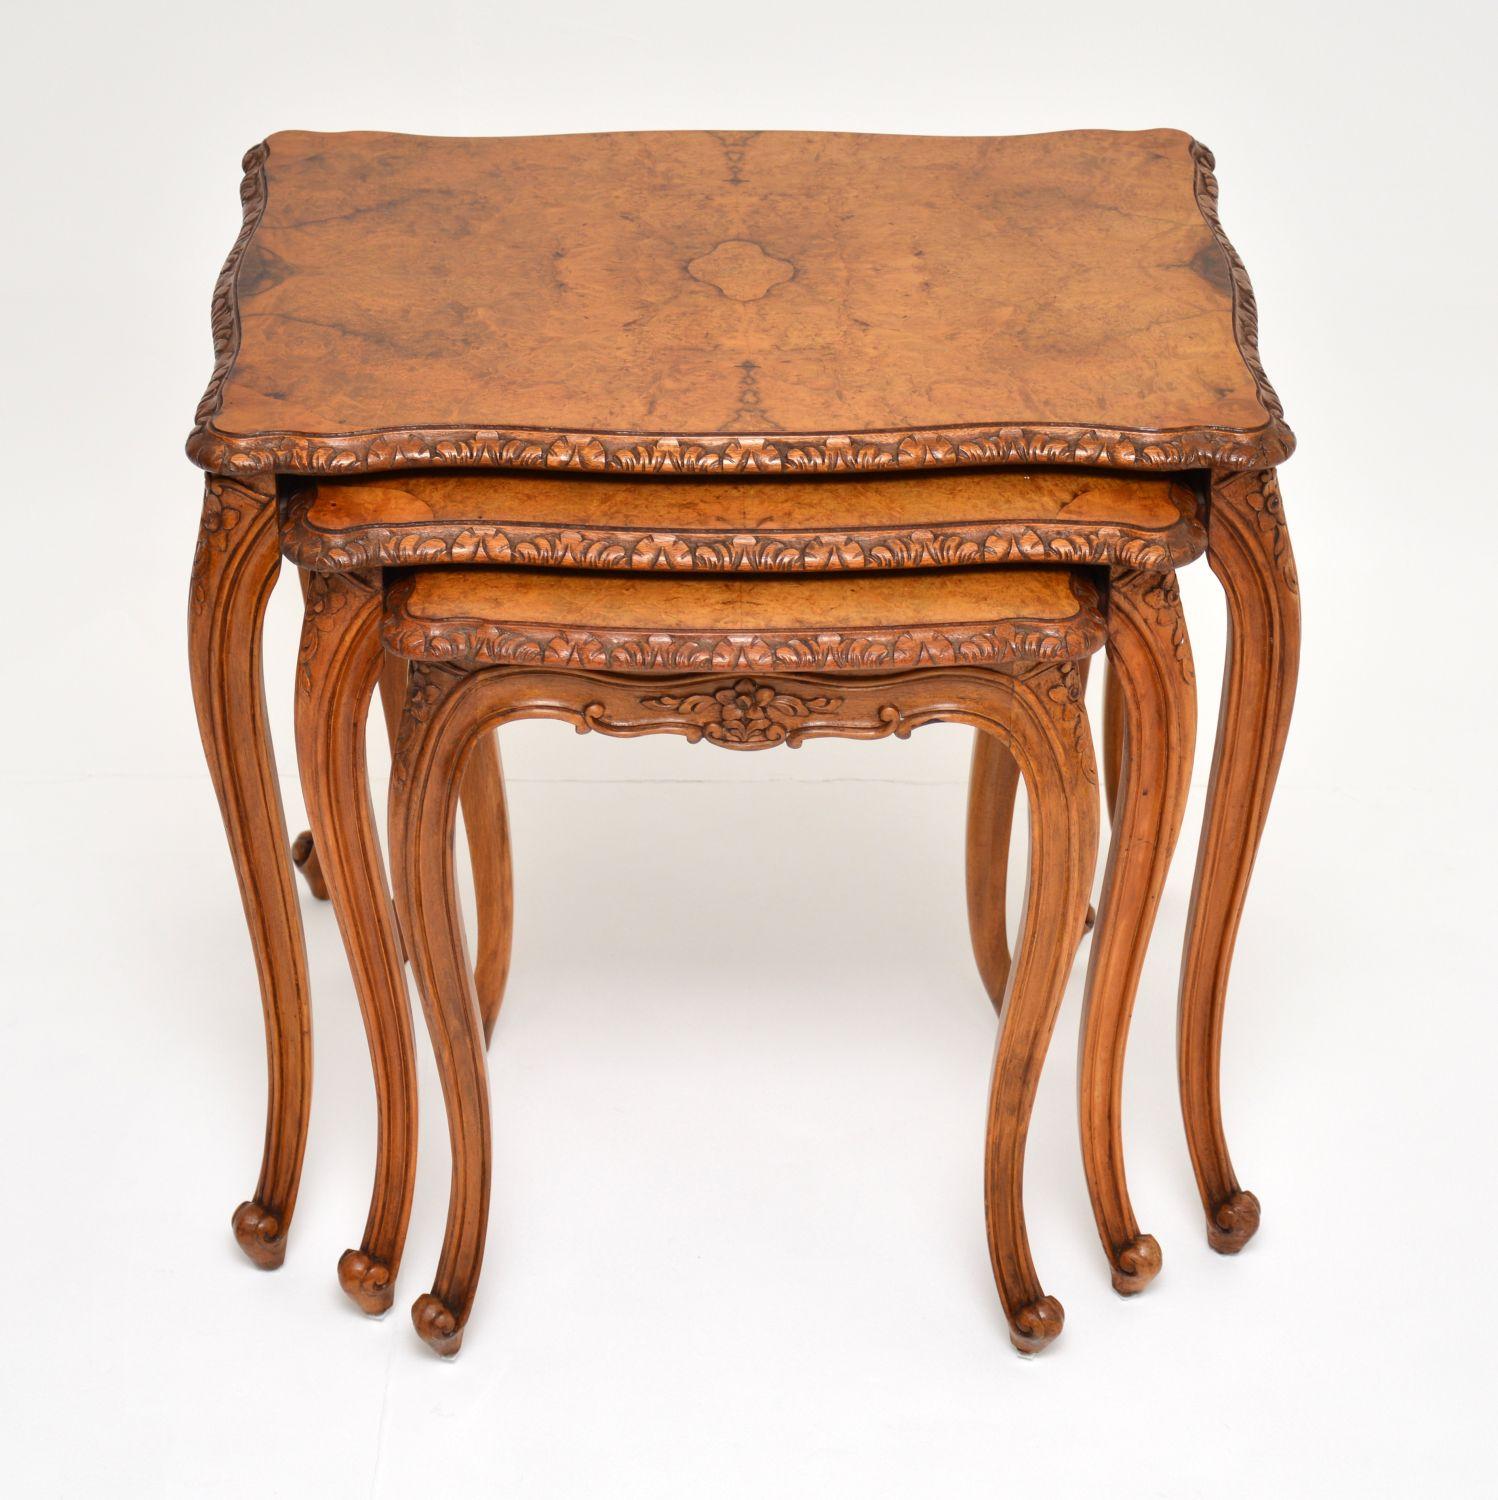 A stunning antique burr walnut nest of three tables. This is in the Classic French style, it dates from circa 1920s-1930s period.

The top has beautifully patterned burr walnut veneers, this has a serpentine shape design, and has finely detailed